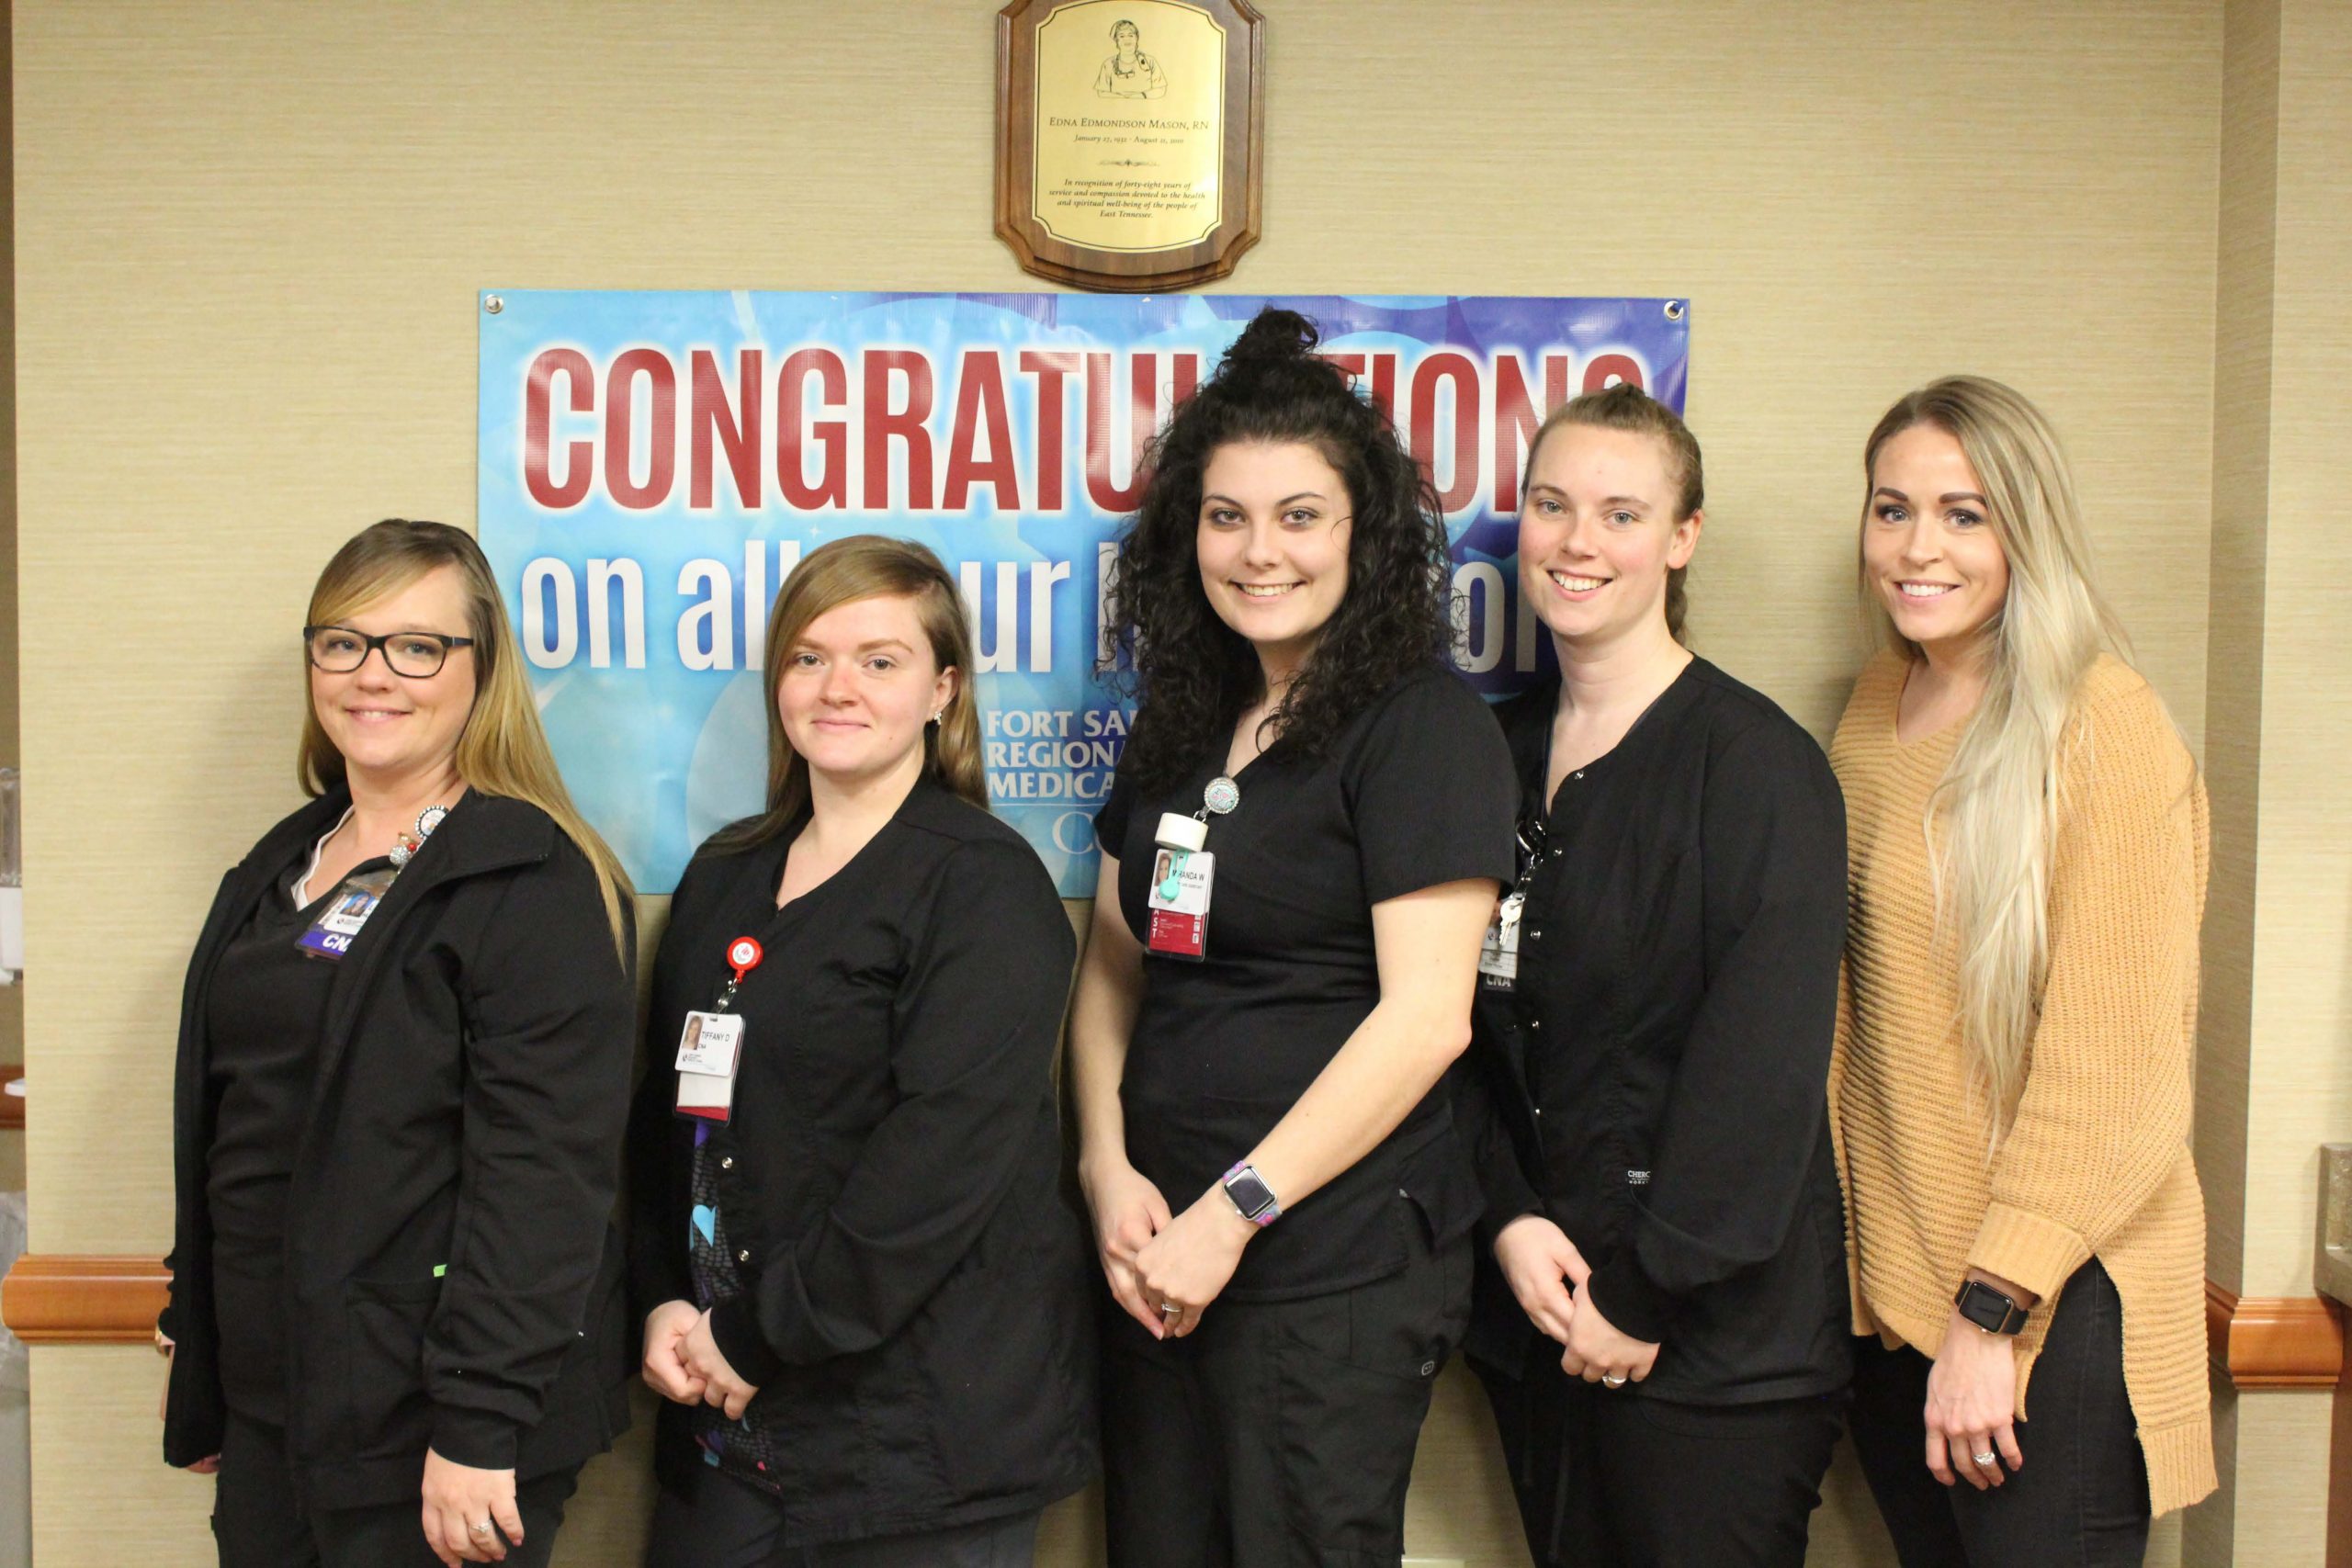 G.E.M. Students who completed their CNA certifications through our GEM-TCAT partnership